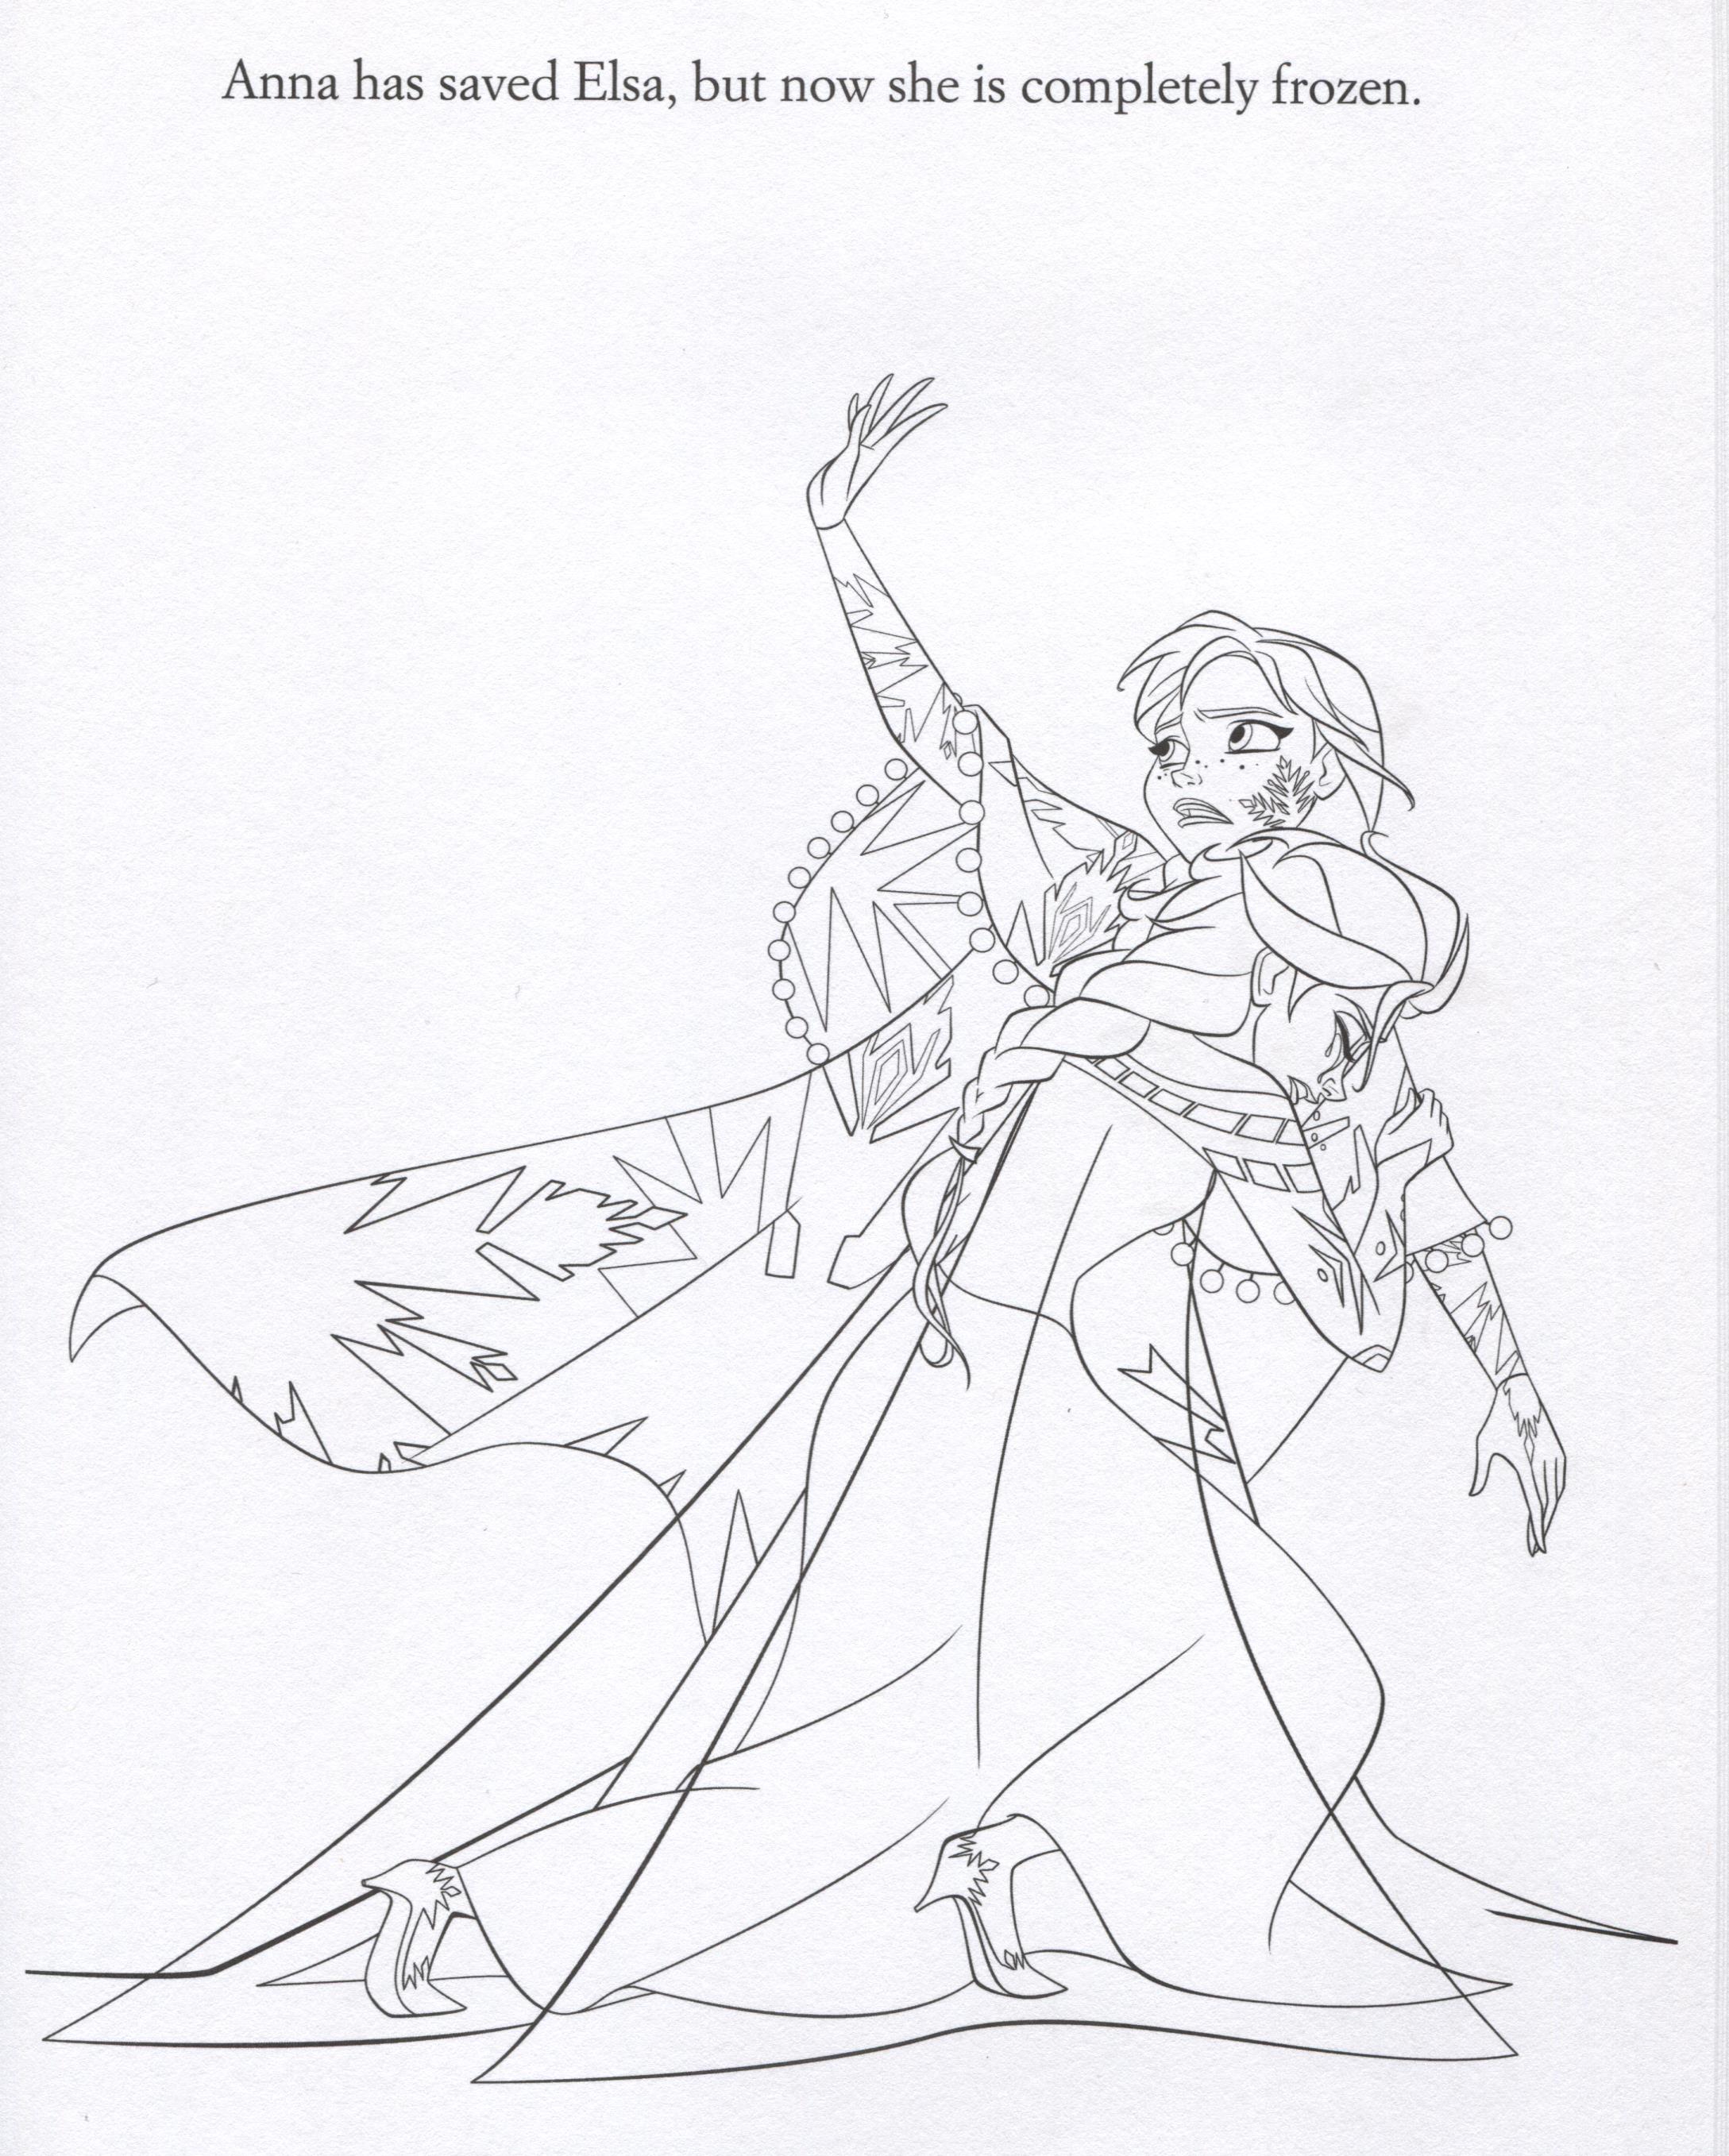 Free Frozen coloring page to download : Elsa protecting Anna